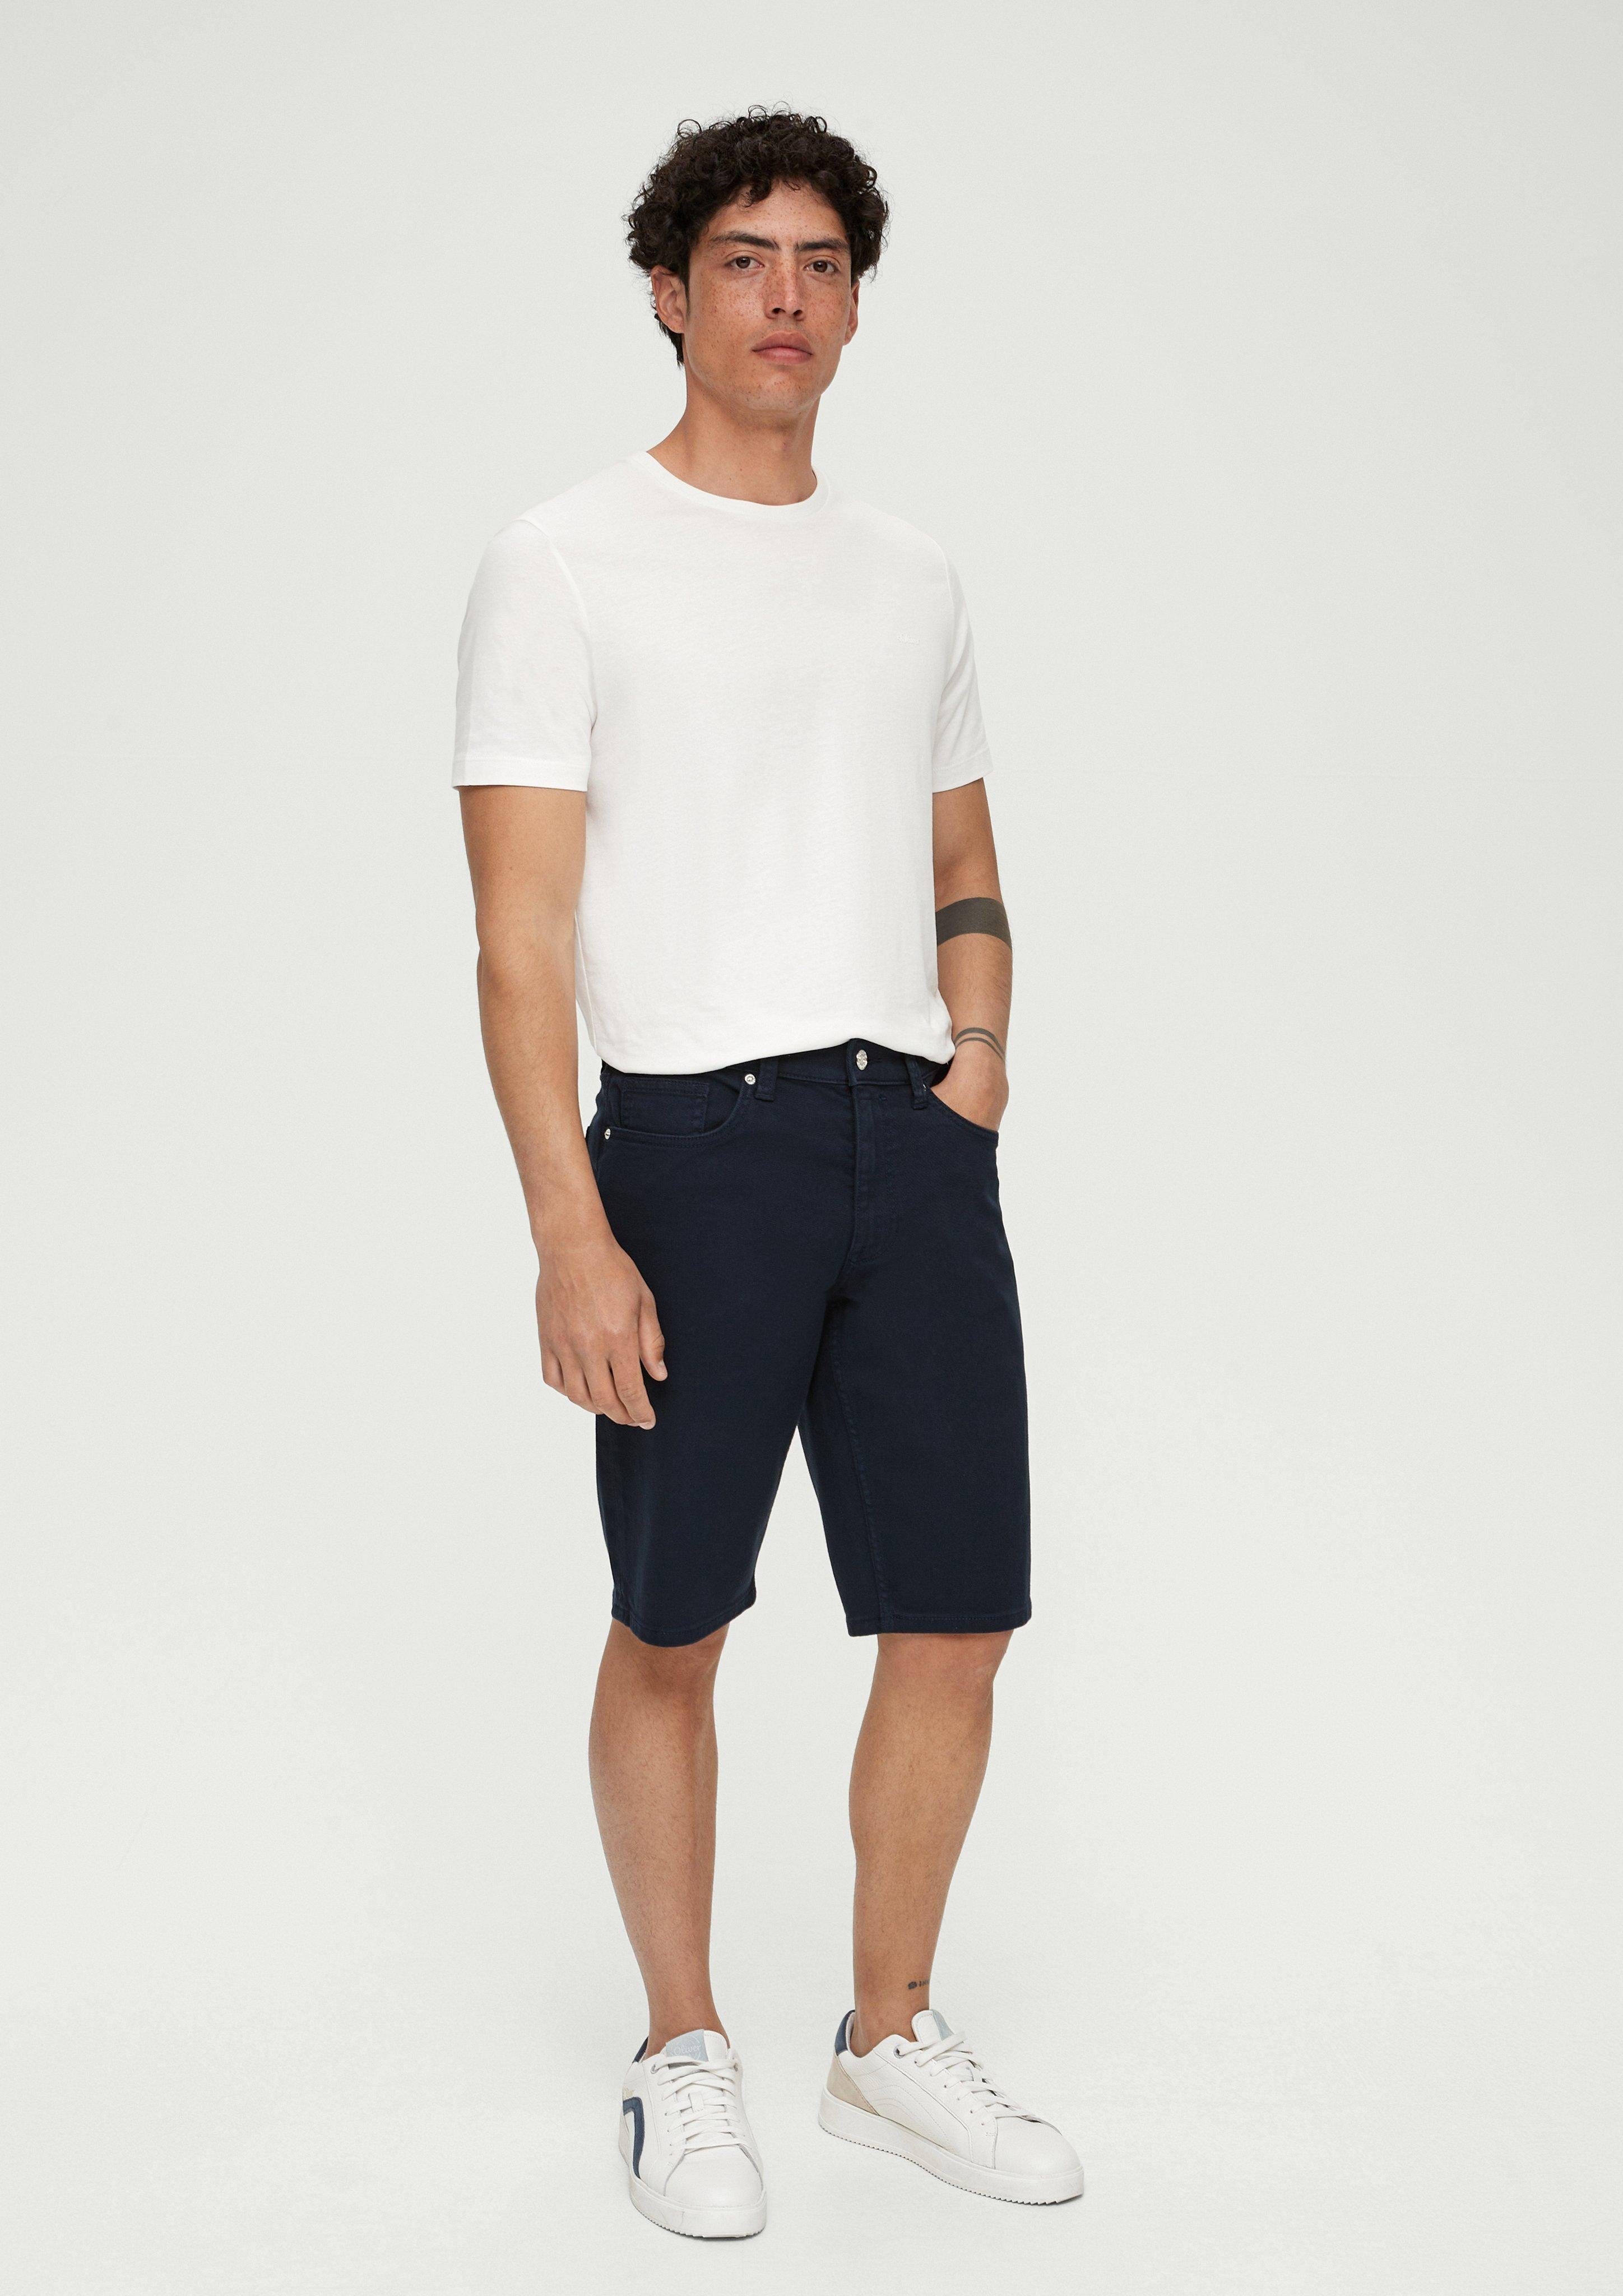 Straight High / s.Oliver Fit / Regular navy Jeans-Shorts / Rise Jeansshorts Label-Patch Leg